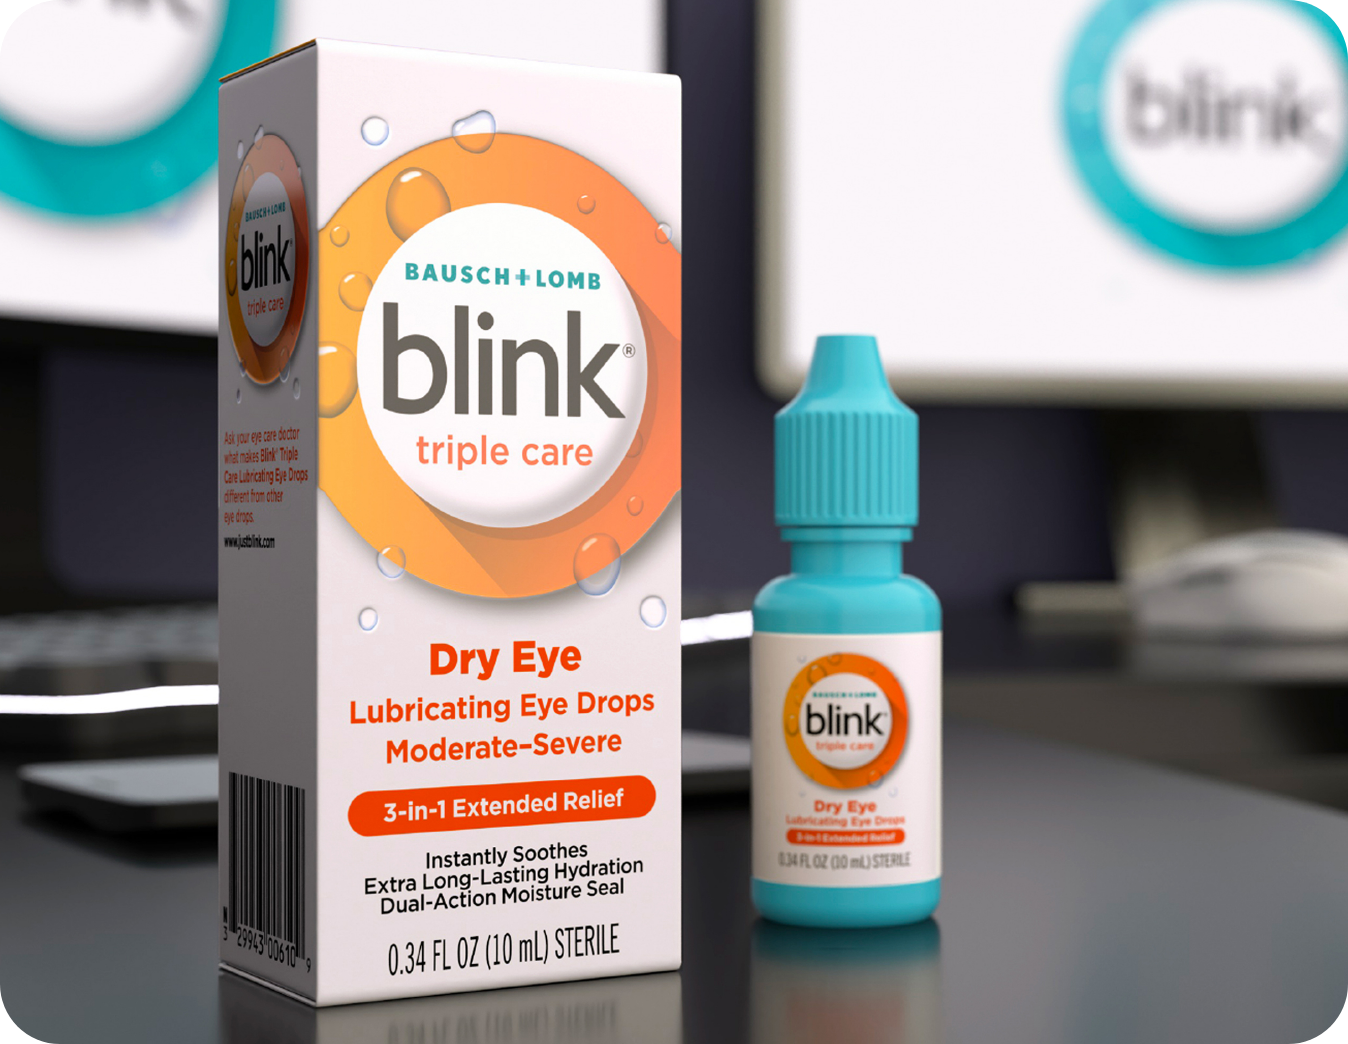 Blink Triple Care Lubricating Eye Drops bottle and carton on a desk in front of a computer monitor